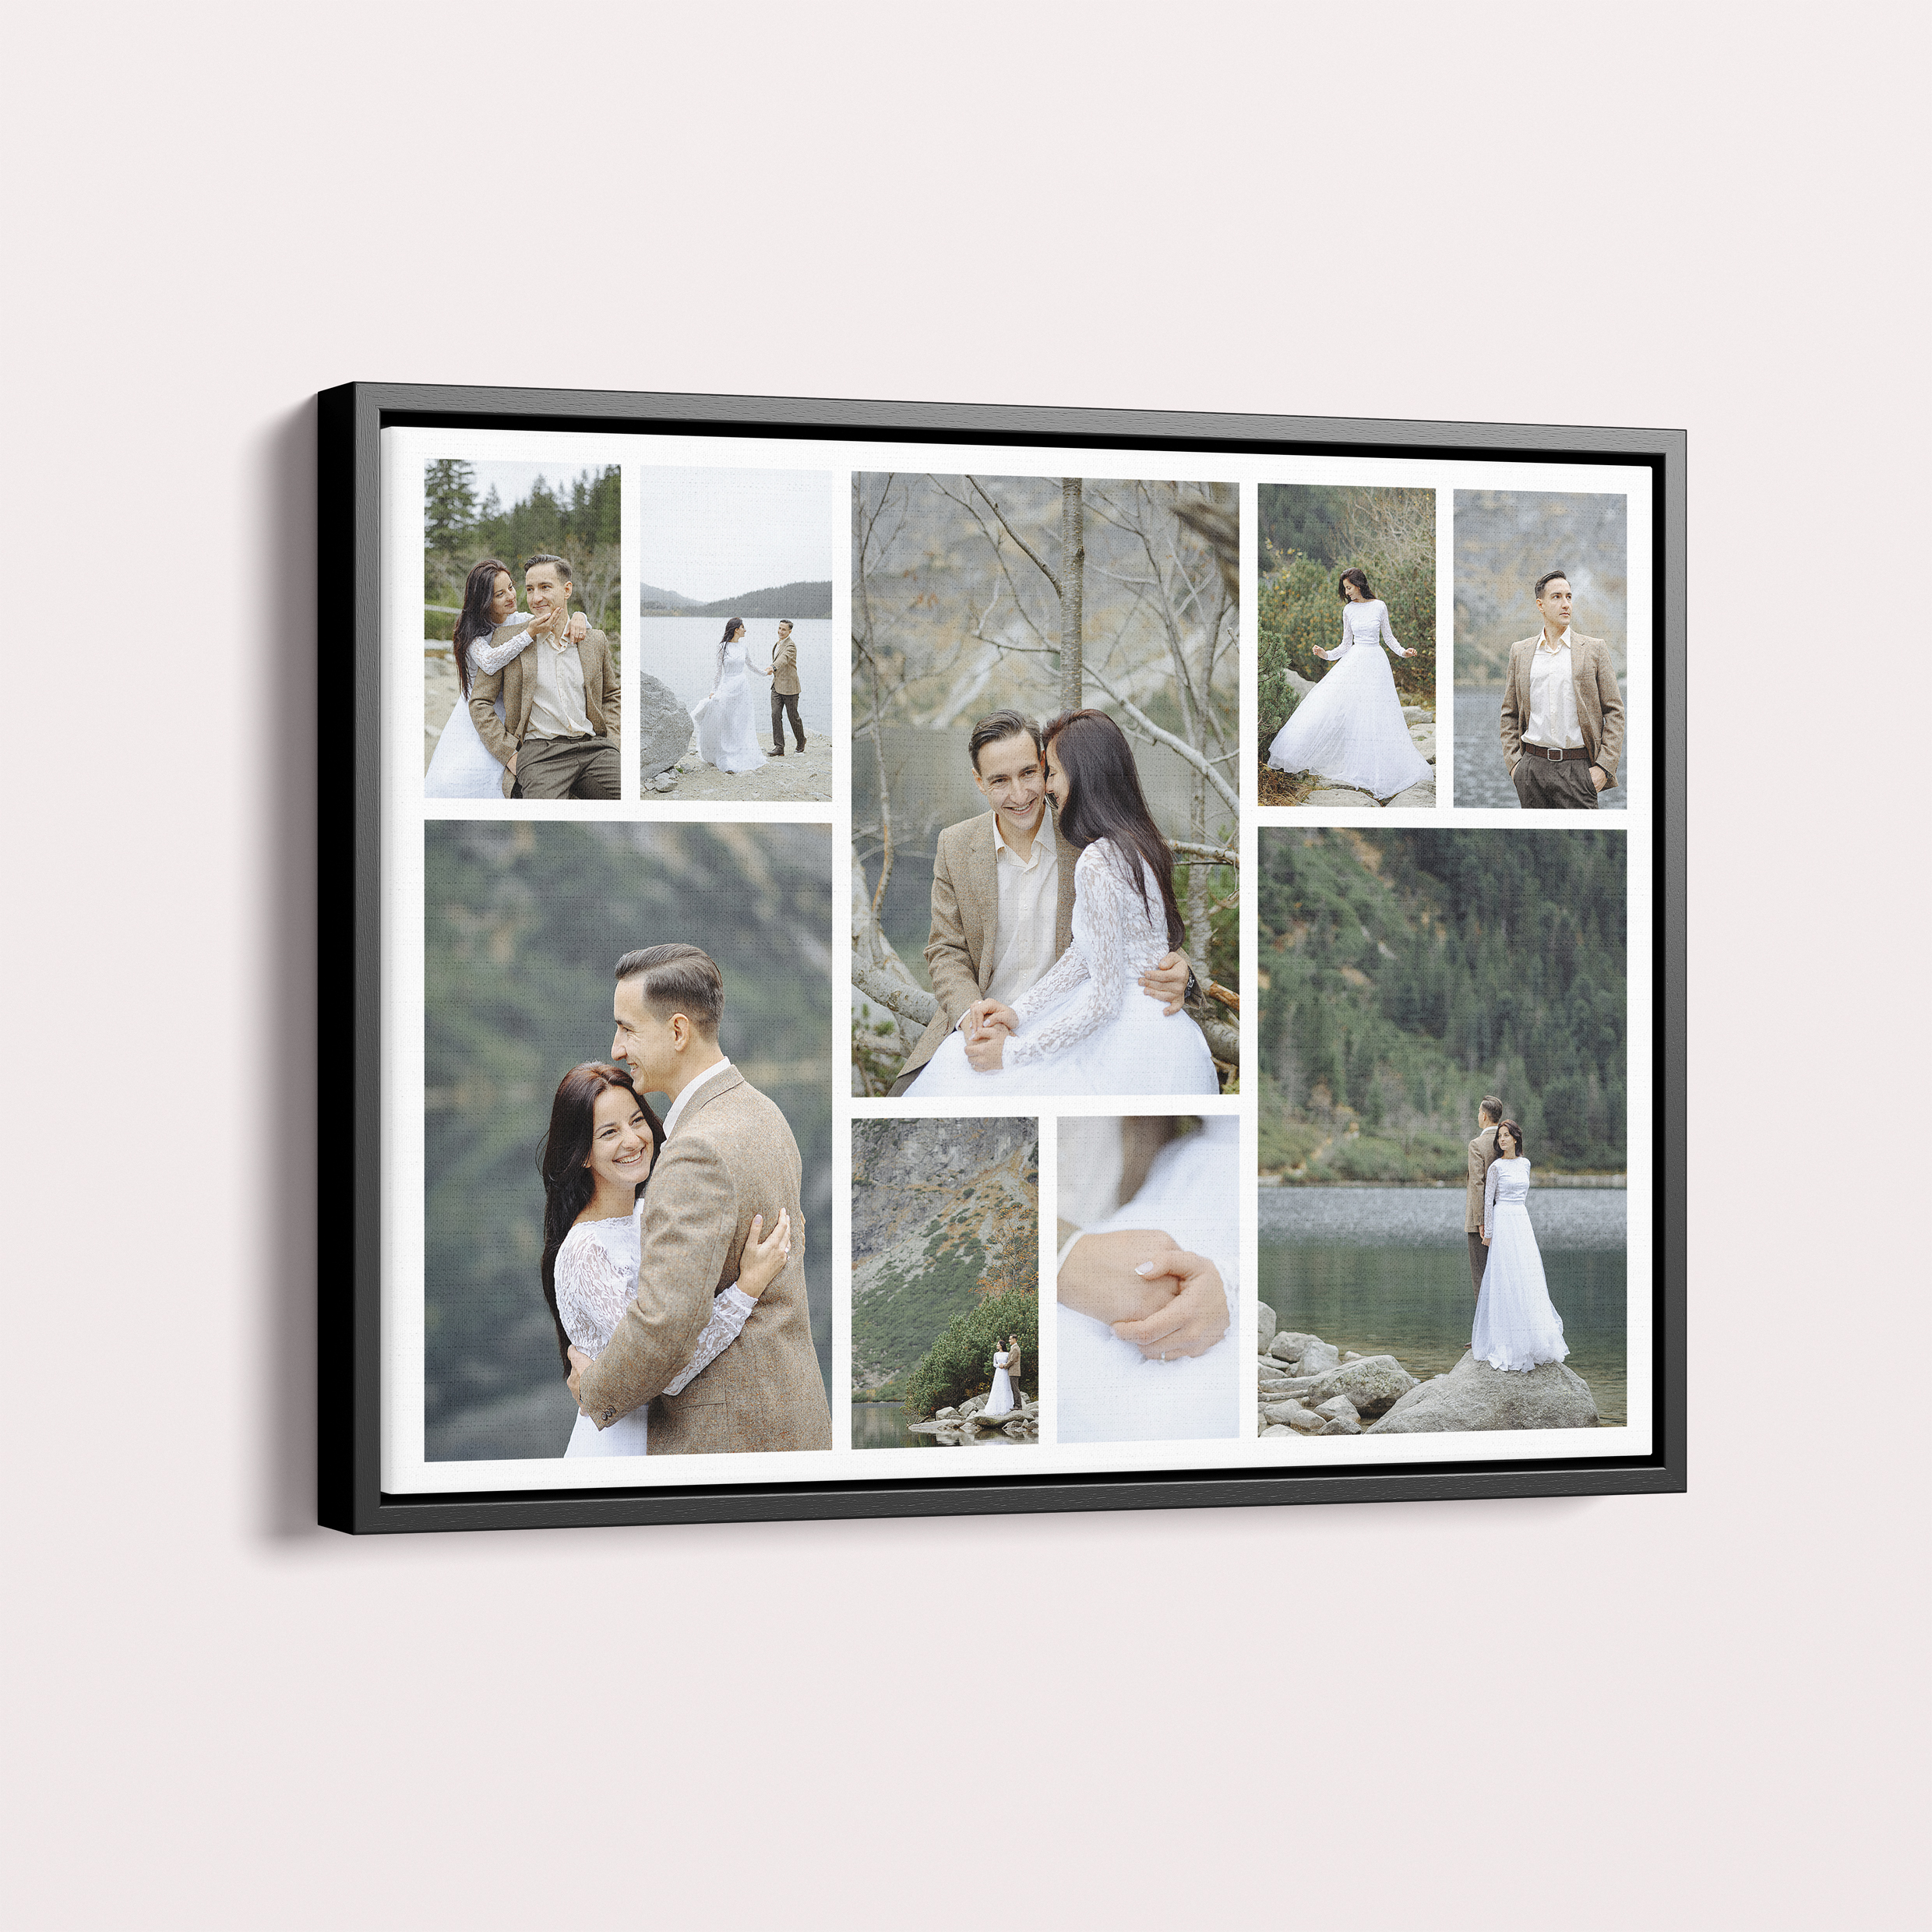  Personalized Spread Montage Framed Photo Canvas - Embark on a captivating visual journey with this landscape-oriented canvas accommodating 9 photos for a stunning collage of cherished memories.